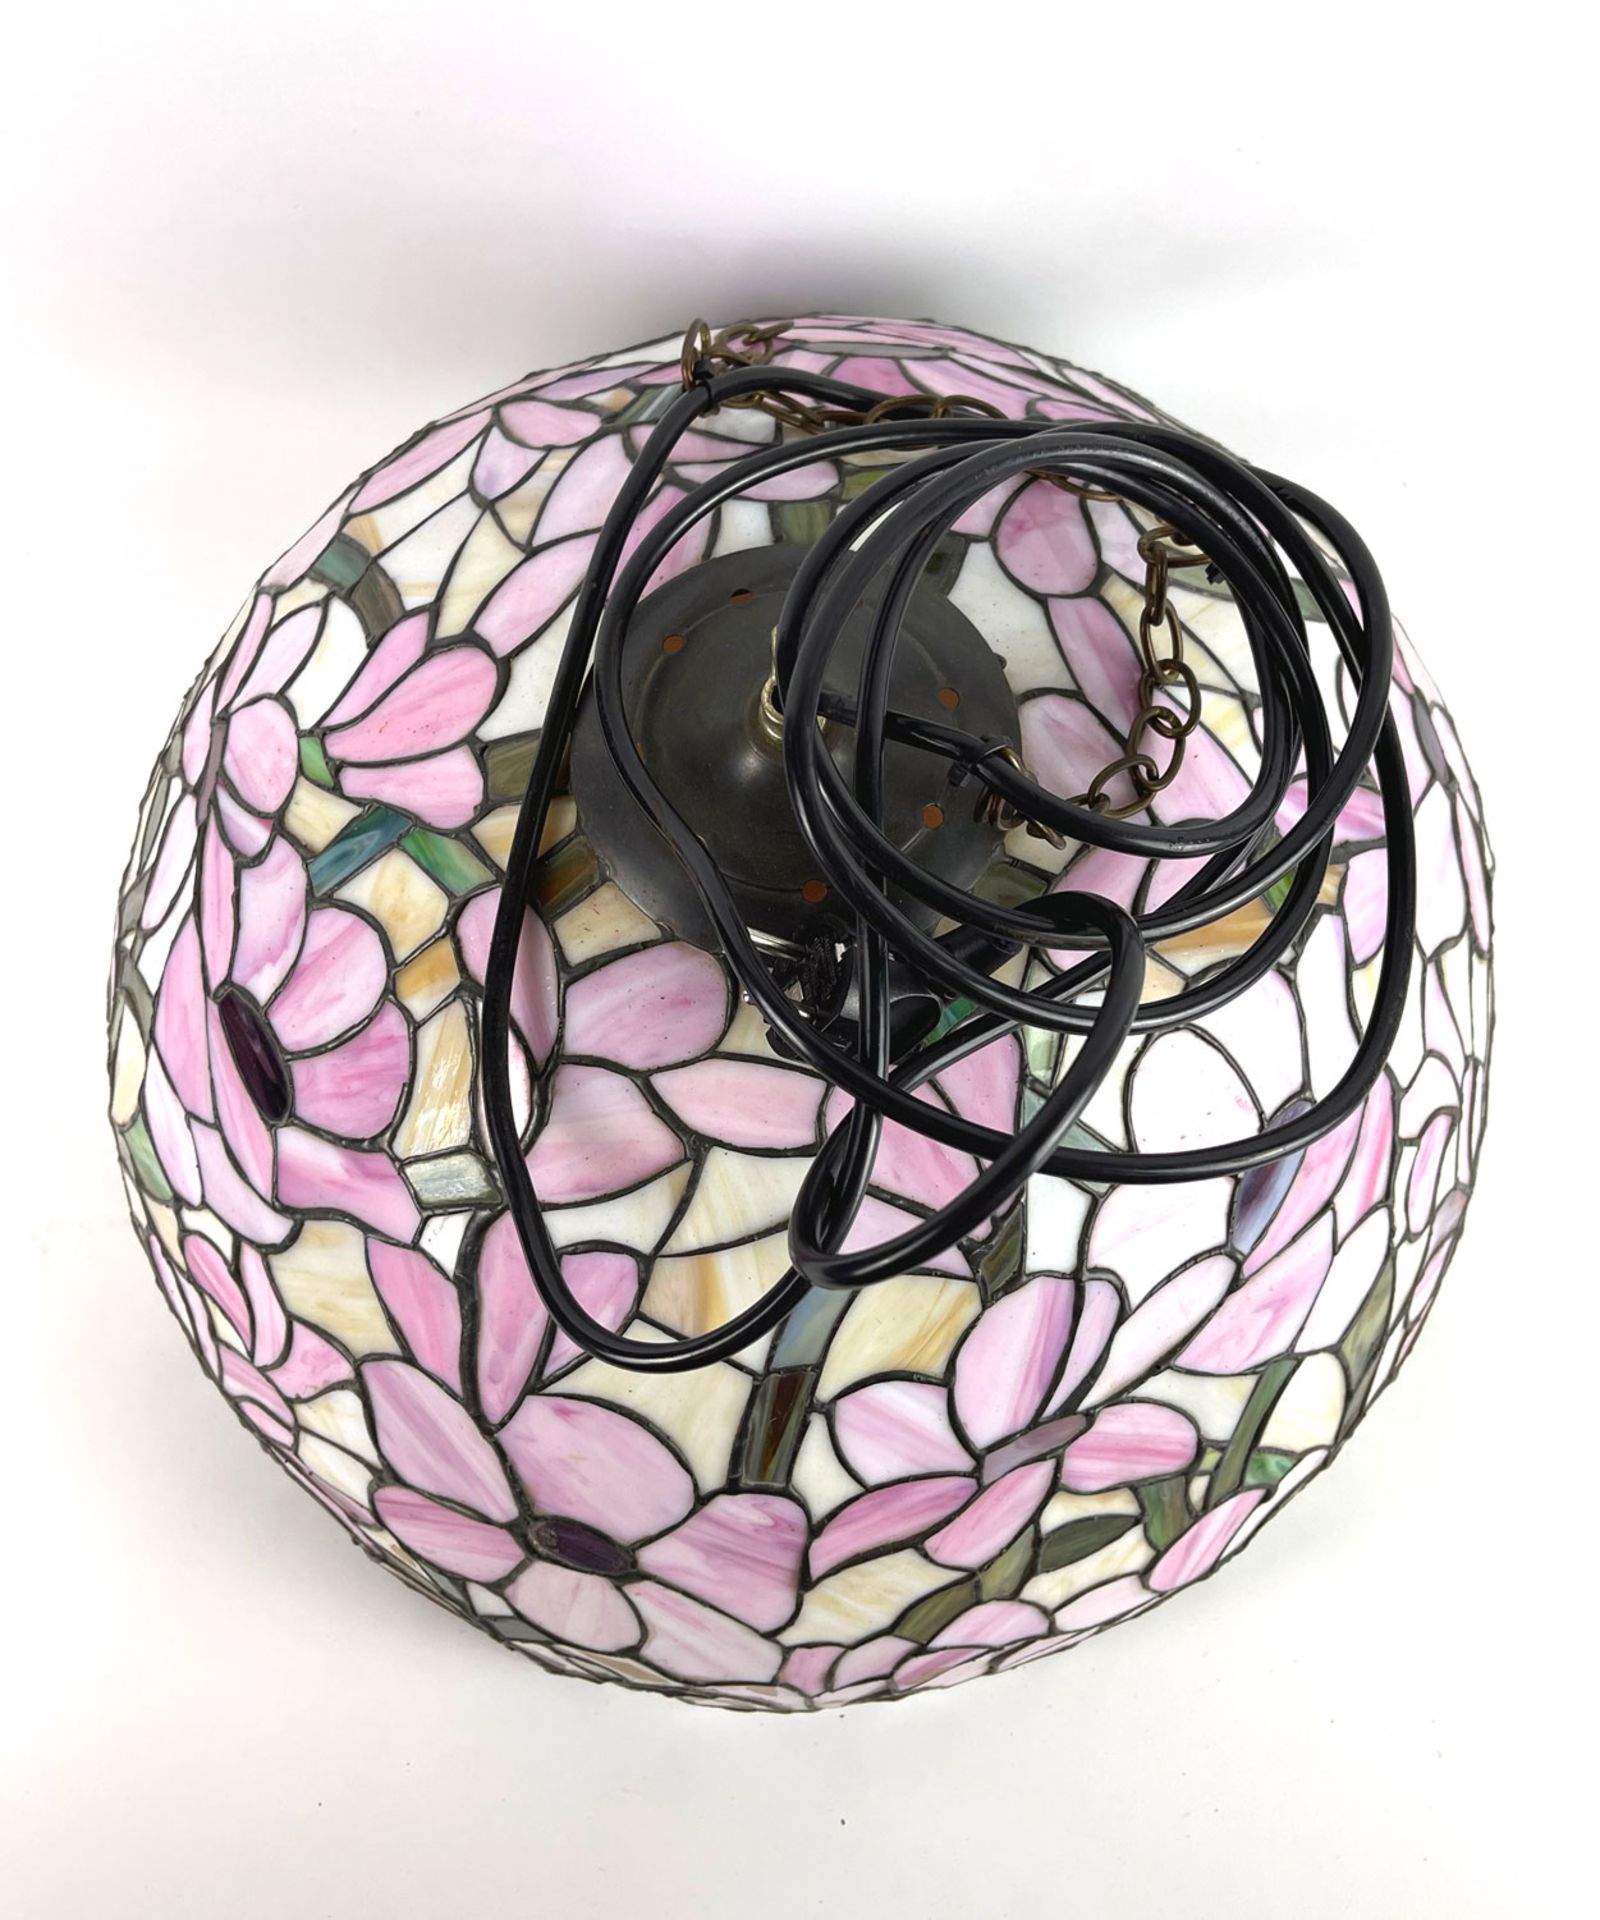 Tiffany Style Hanging Ceiling Lamp with Flower Motif - Image 2 of 3